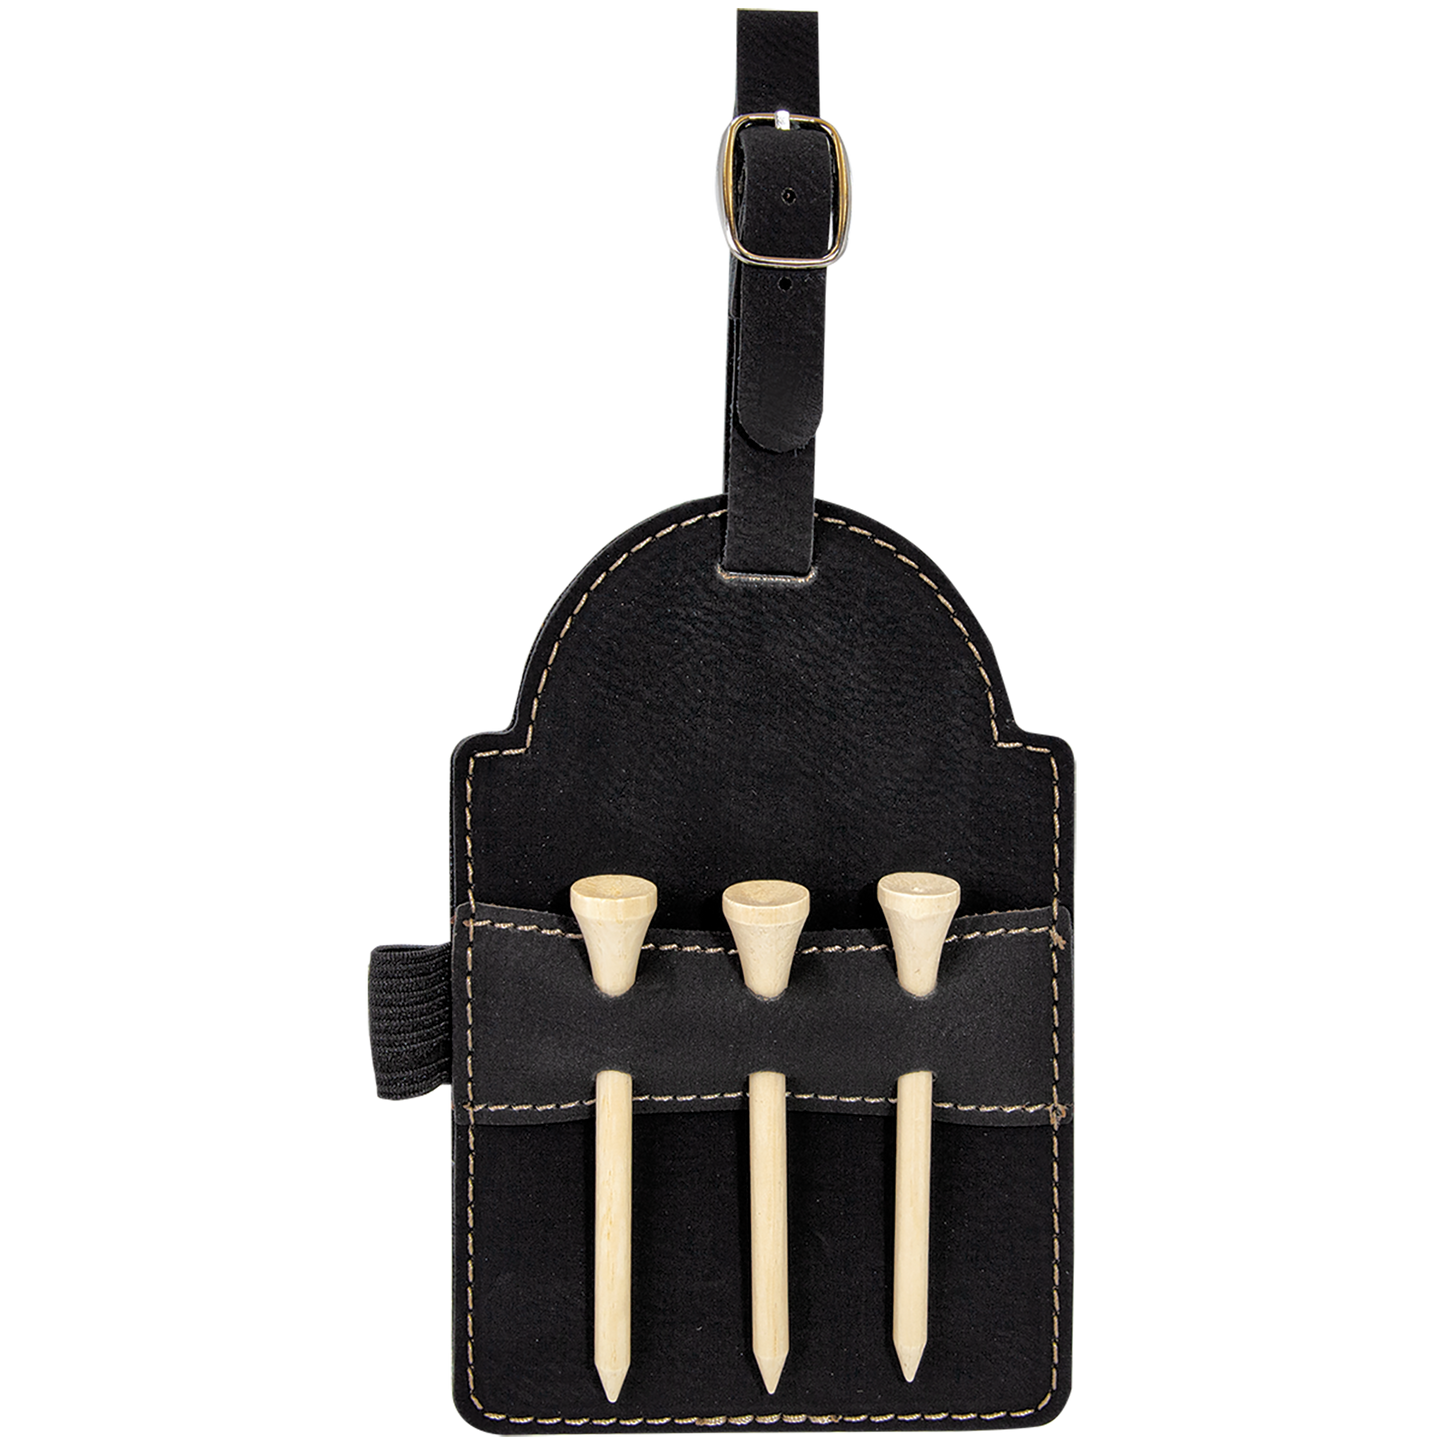 5" x 3 1/4" Black/Gold Leatherette Golf Bag Tag with 3 Wooden Tees